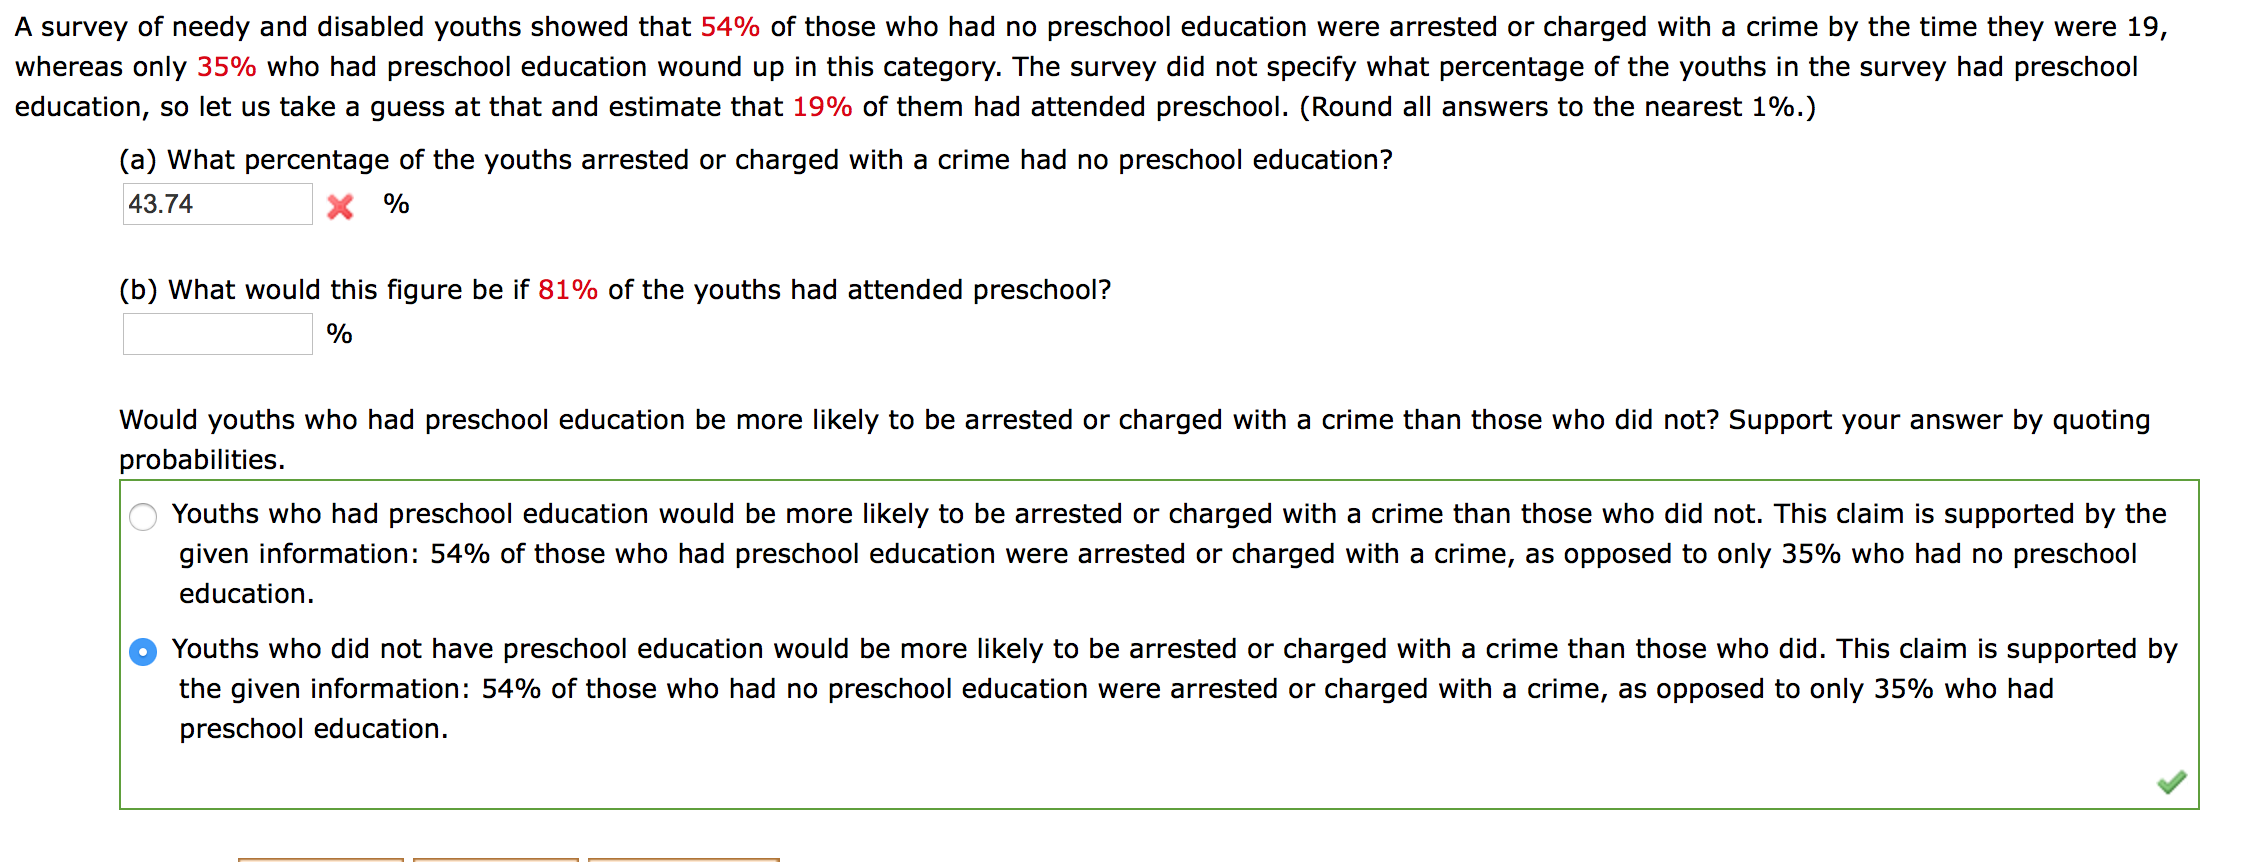 A survey of needy and disabled youths showed that 54% of those who had no preschool education were arrested or charged with a crime by the time they were 19,
whereas only 35% who had preschool education wound up in this category. The survey did not specify what percentage of the youths in the survey had preschool
education, so let us take a guess at that and estimate that 19% of them had attended preschool. (Round all answers to the nearest 1%.)
(a) What percentage of the youths arrested or charged with a crime had no preschool education?
43.74
X %
(b) What would this figure be if 81% of the youths had attended preschool?
%
